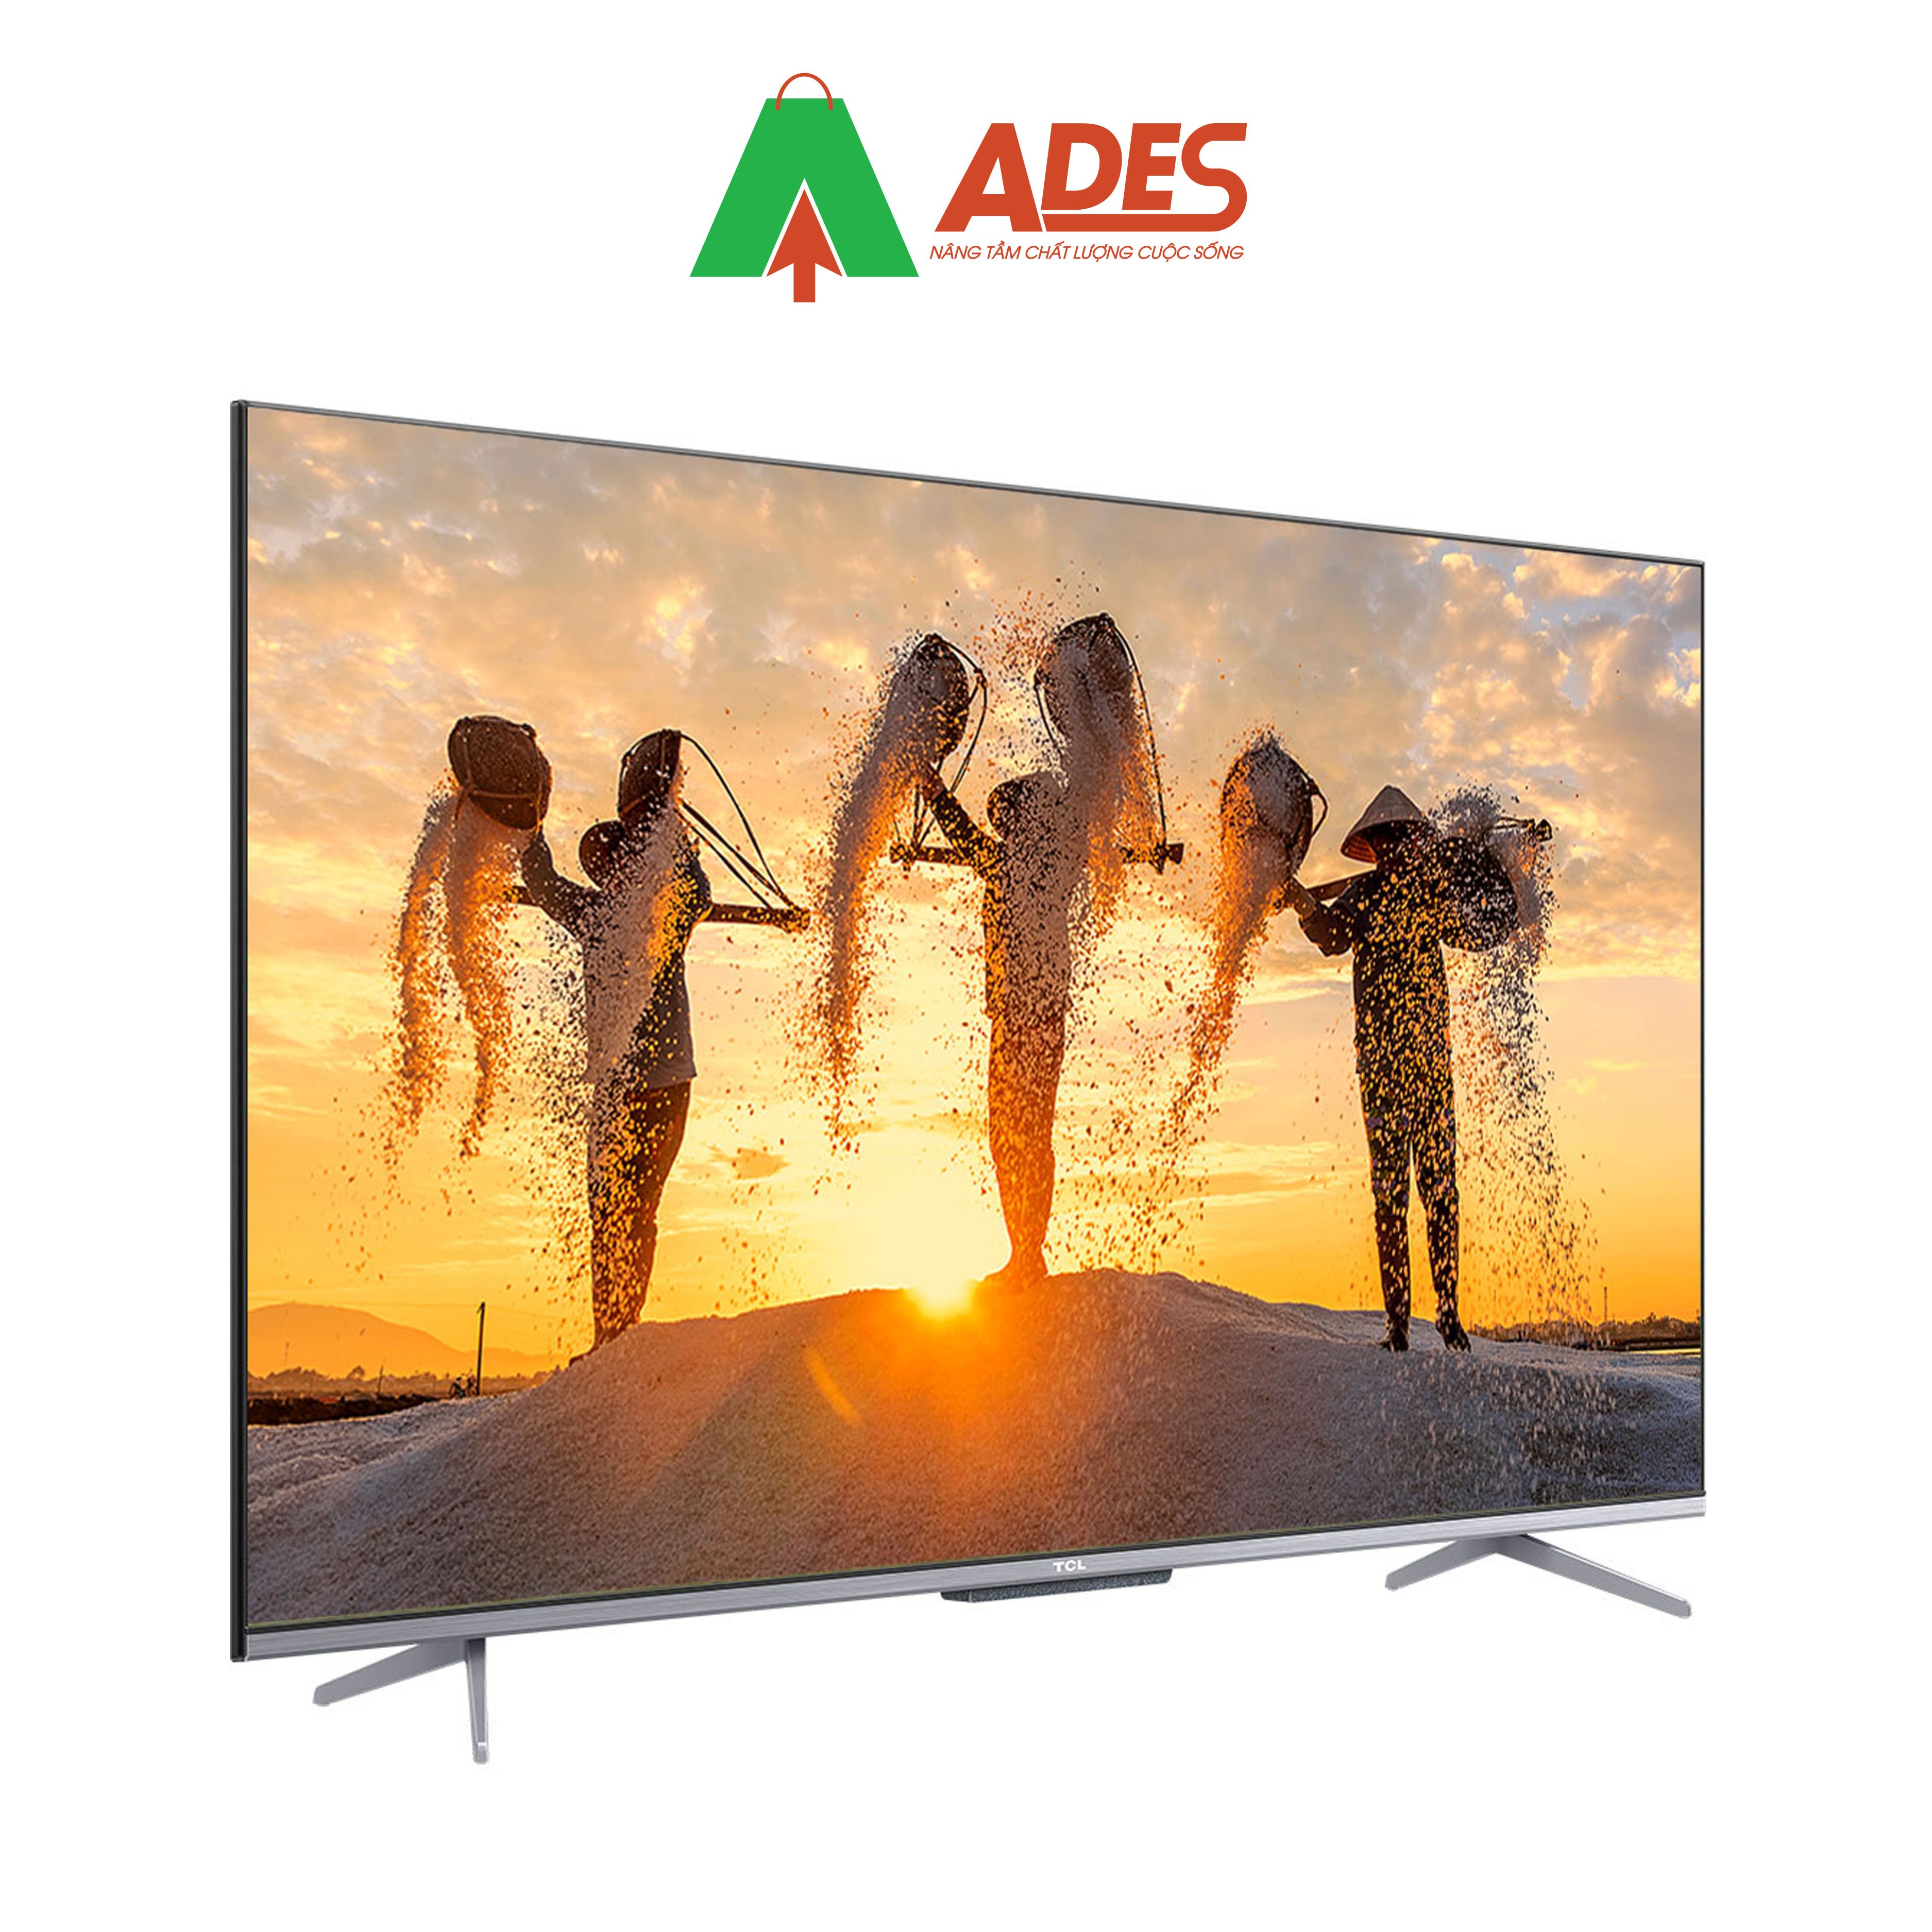 Hinh anh thuc te Android TiVi TCL 4K 50inch 50P725